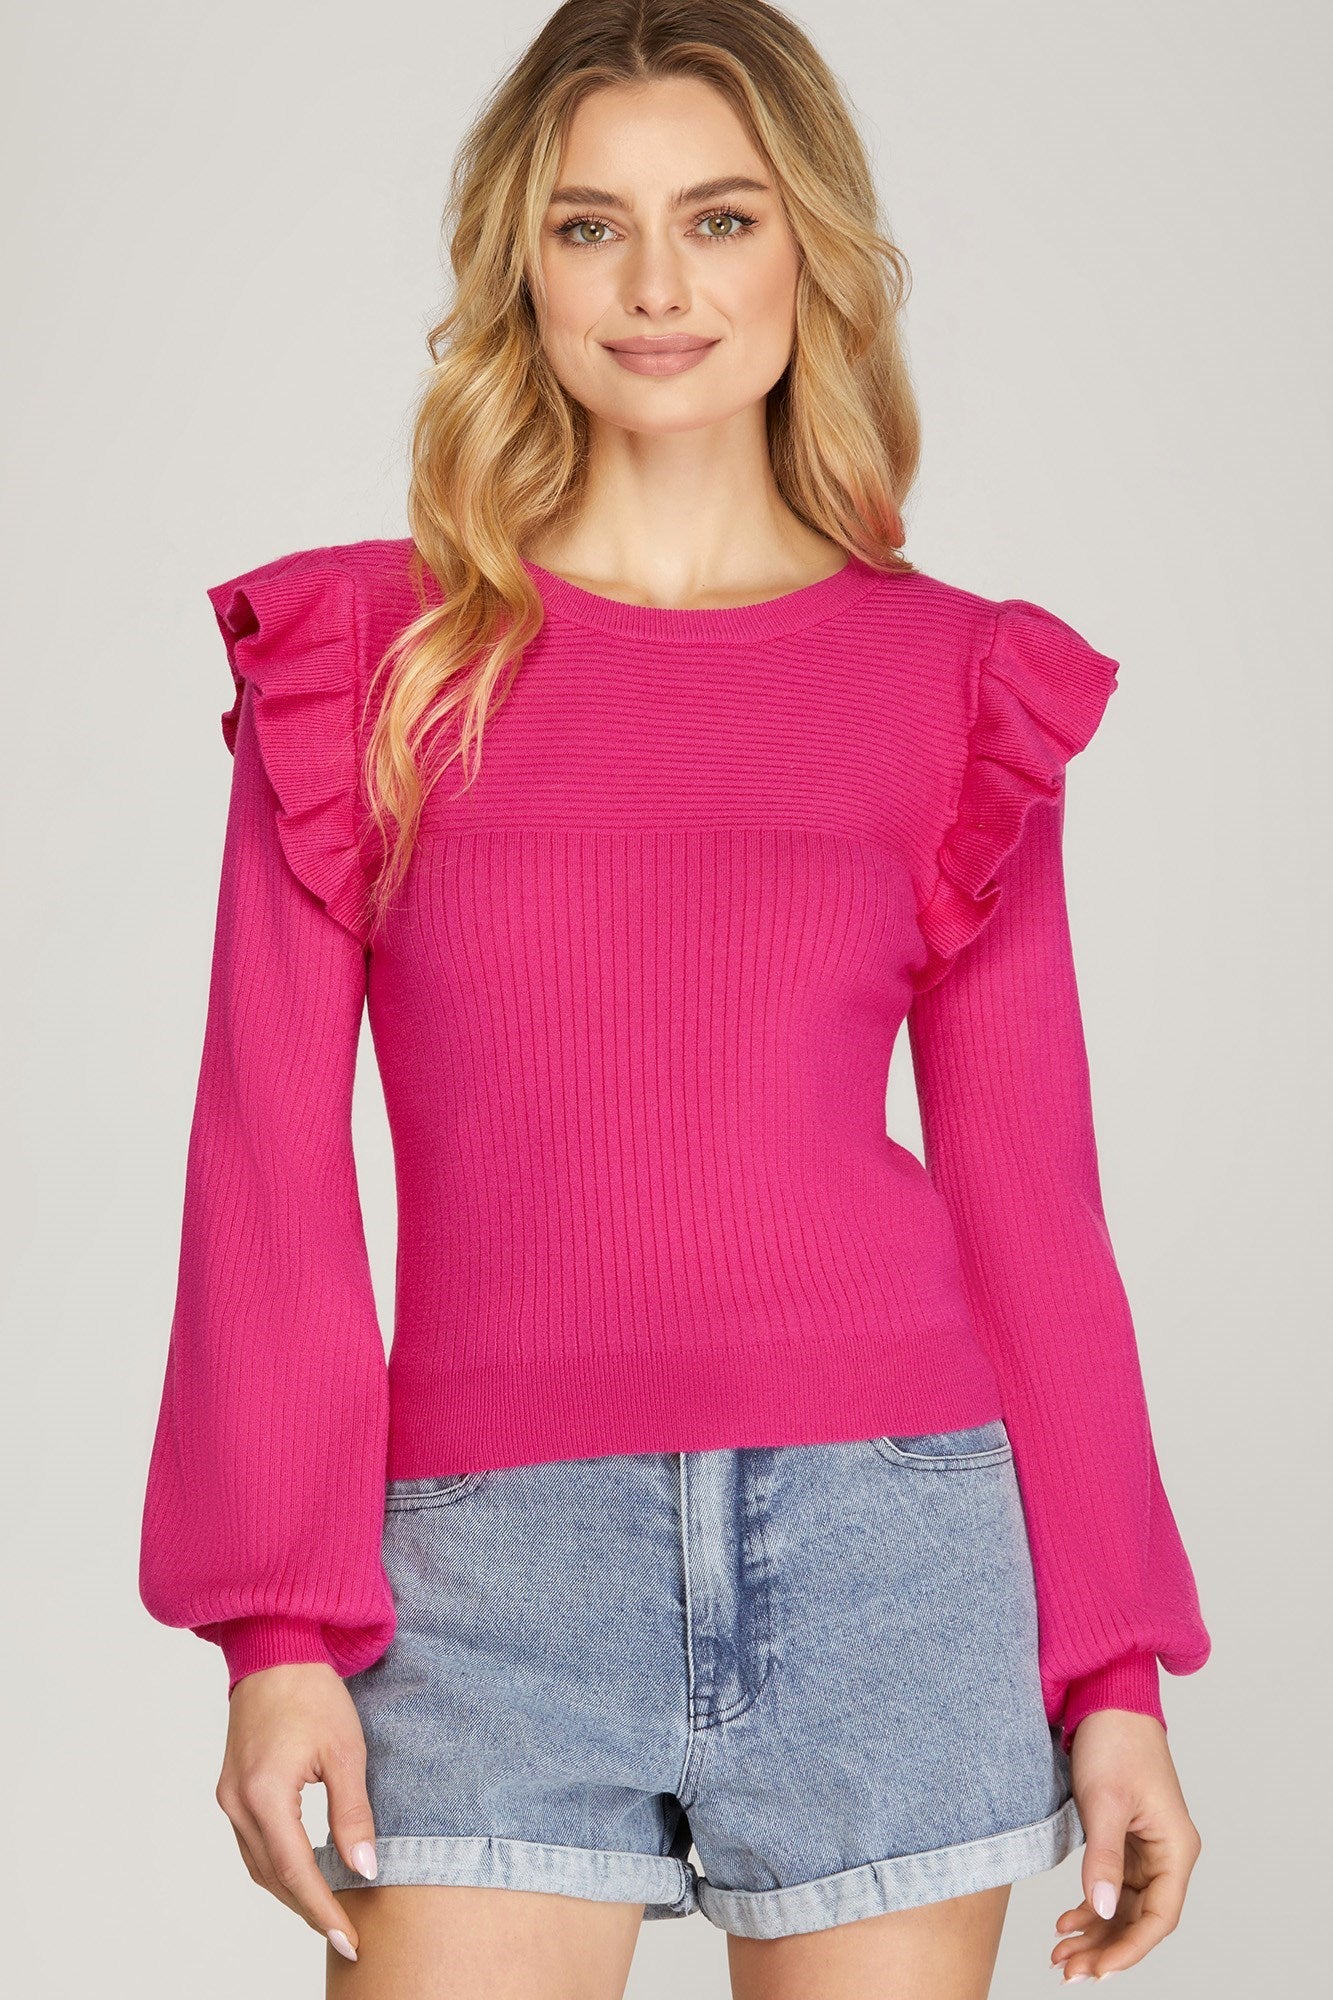 SHE AND SKY Women's Sweaters HOT PINK / S Long Ruffled Sleeve Sweater Top || David's Clothing SY5049